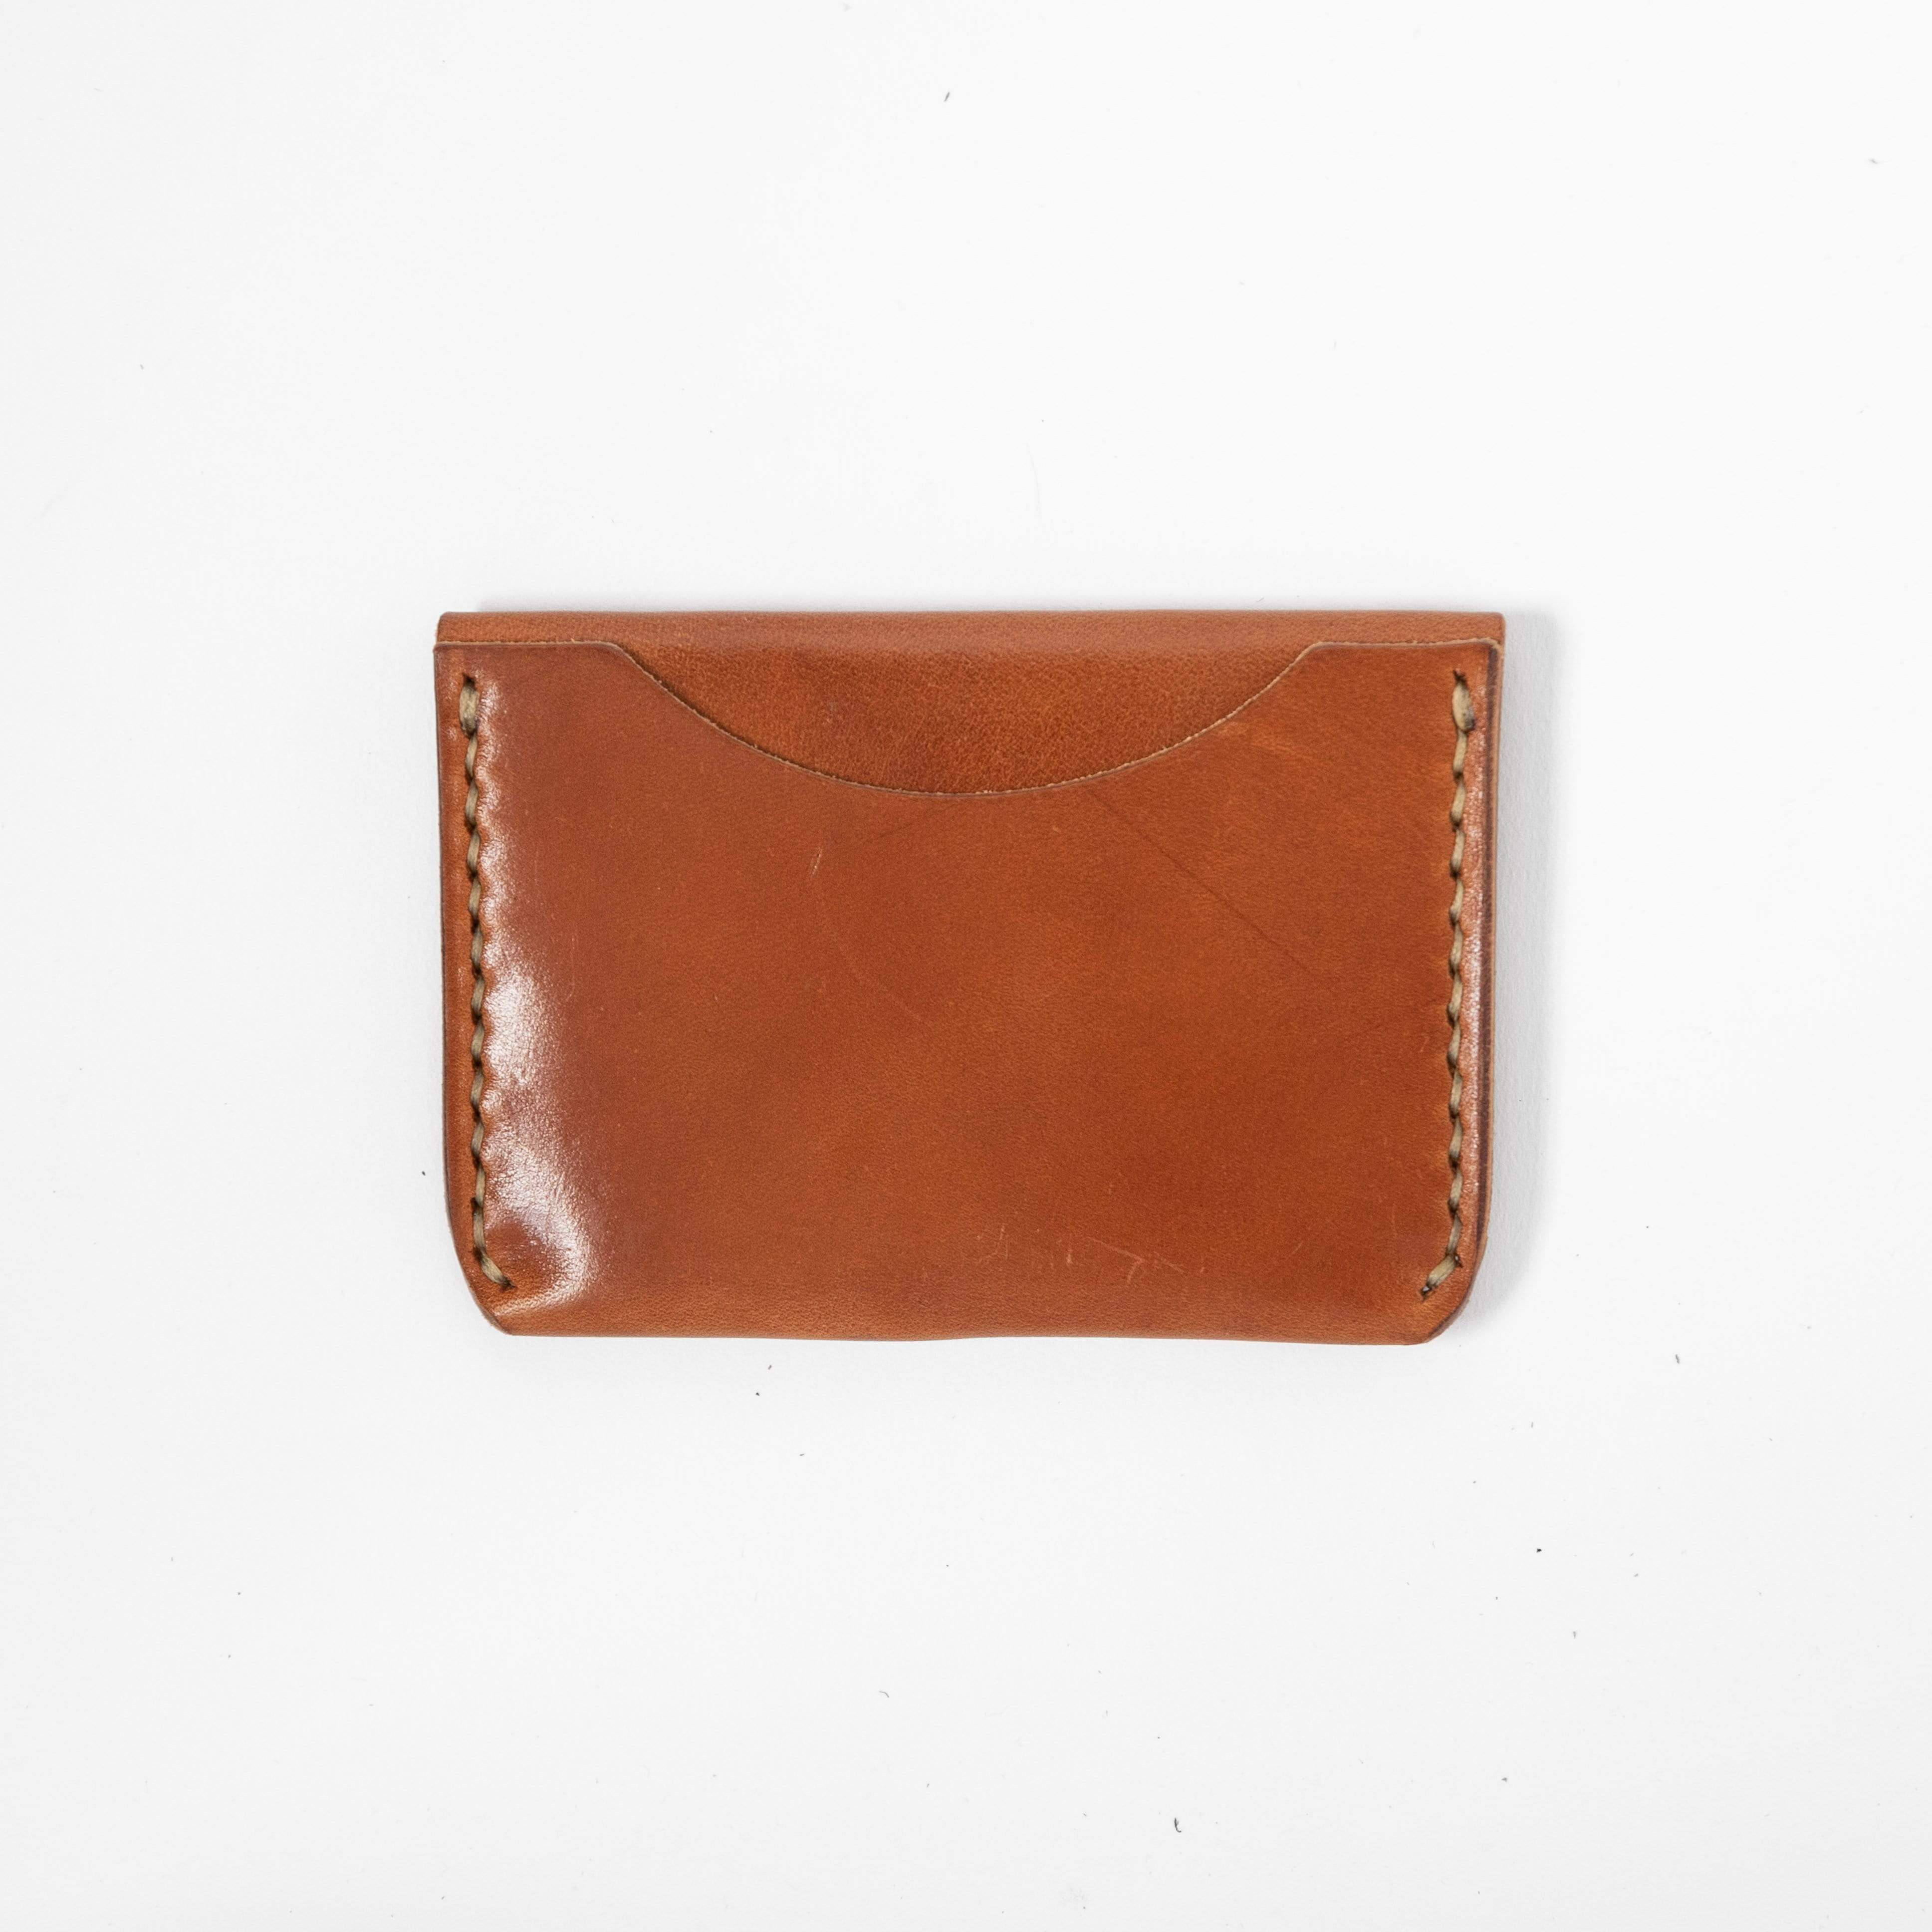 Genuine Leather Bifold Wallet For Men Designer Card Holder With Cash And  Coin Pockets, Vintage Style Clutch Bag From Wishmall66, $22.63 | DHgate.Com